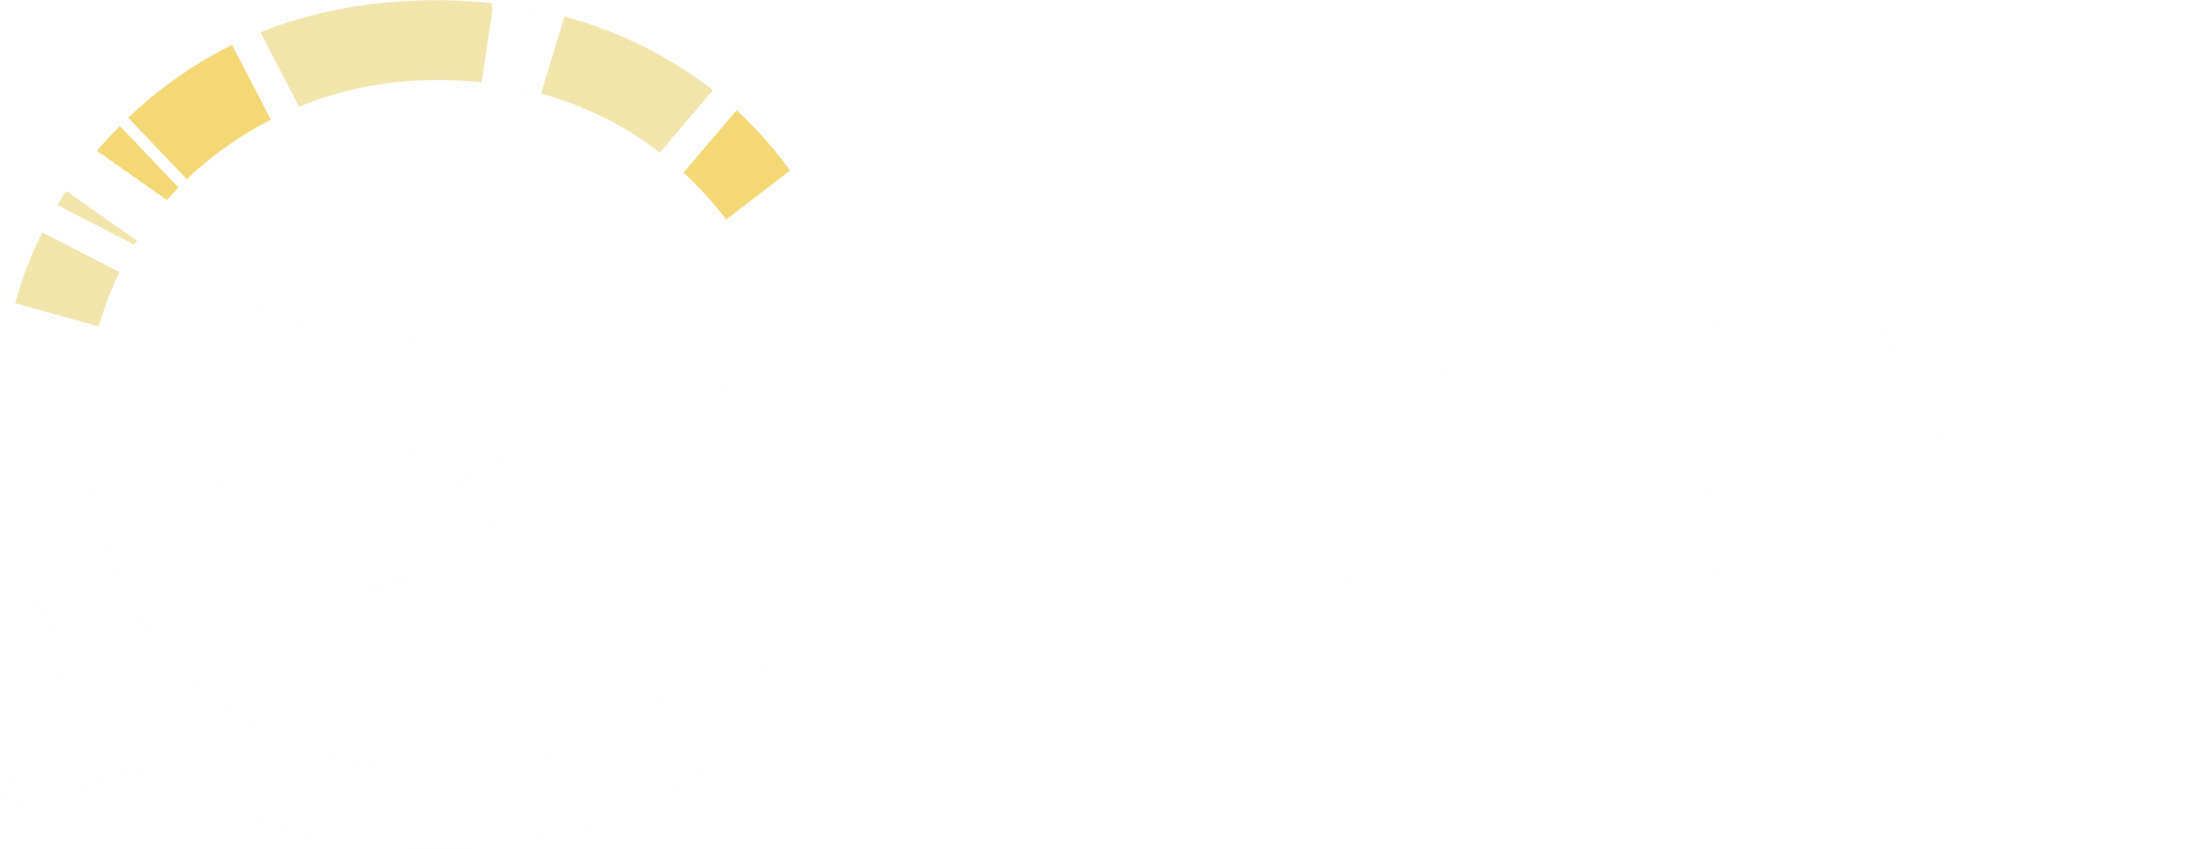 Welcome course branding